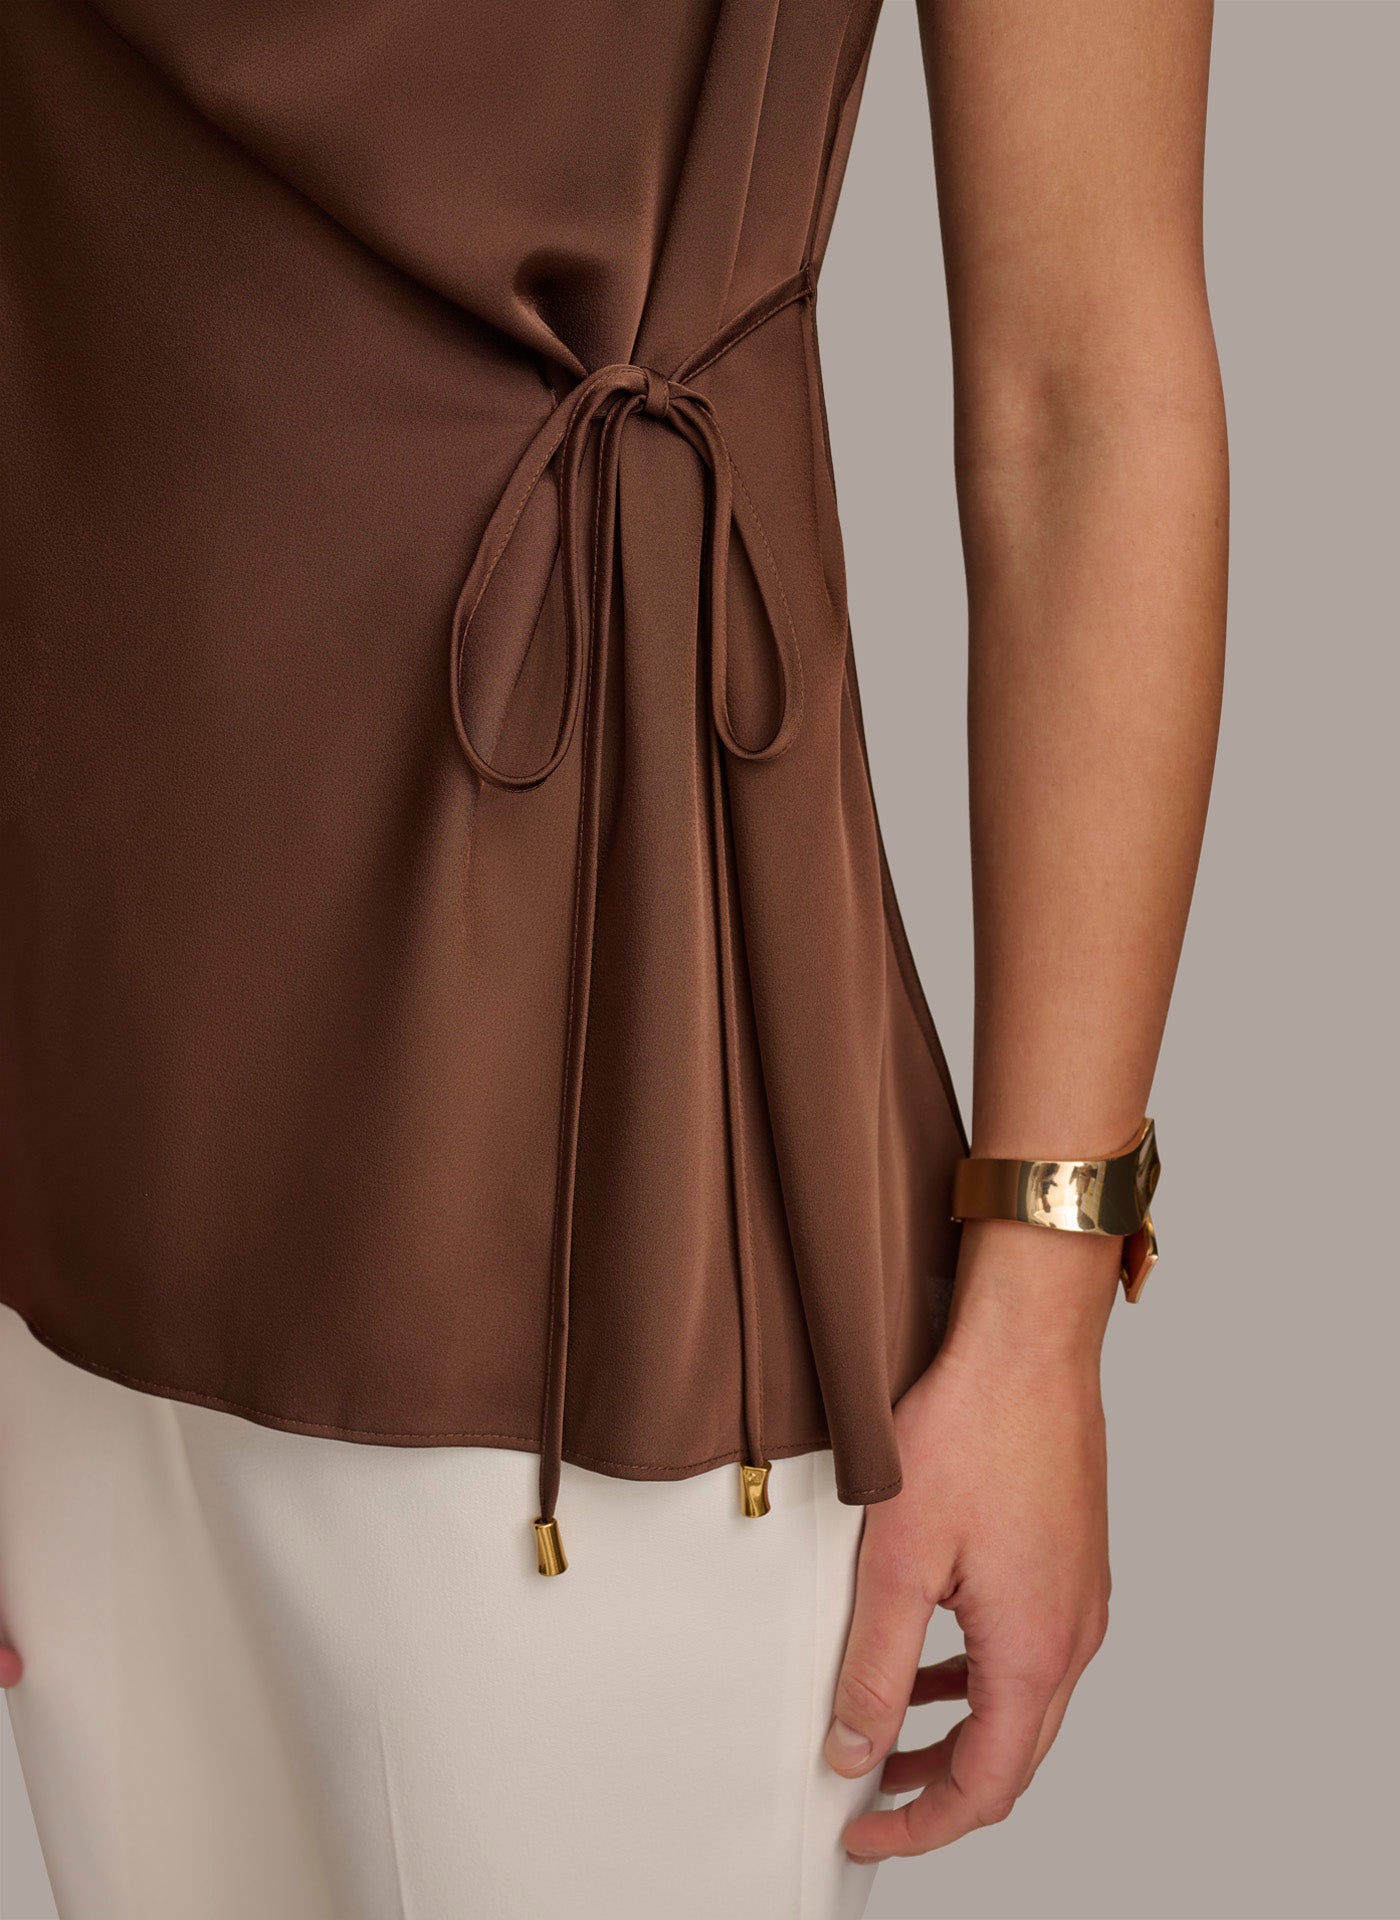 DRAPE NECK WITH SIDE TIE TOP